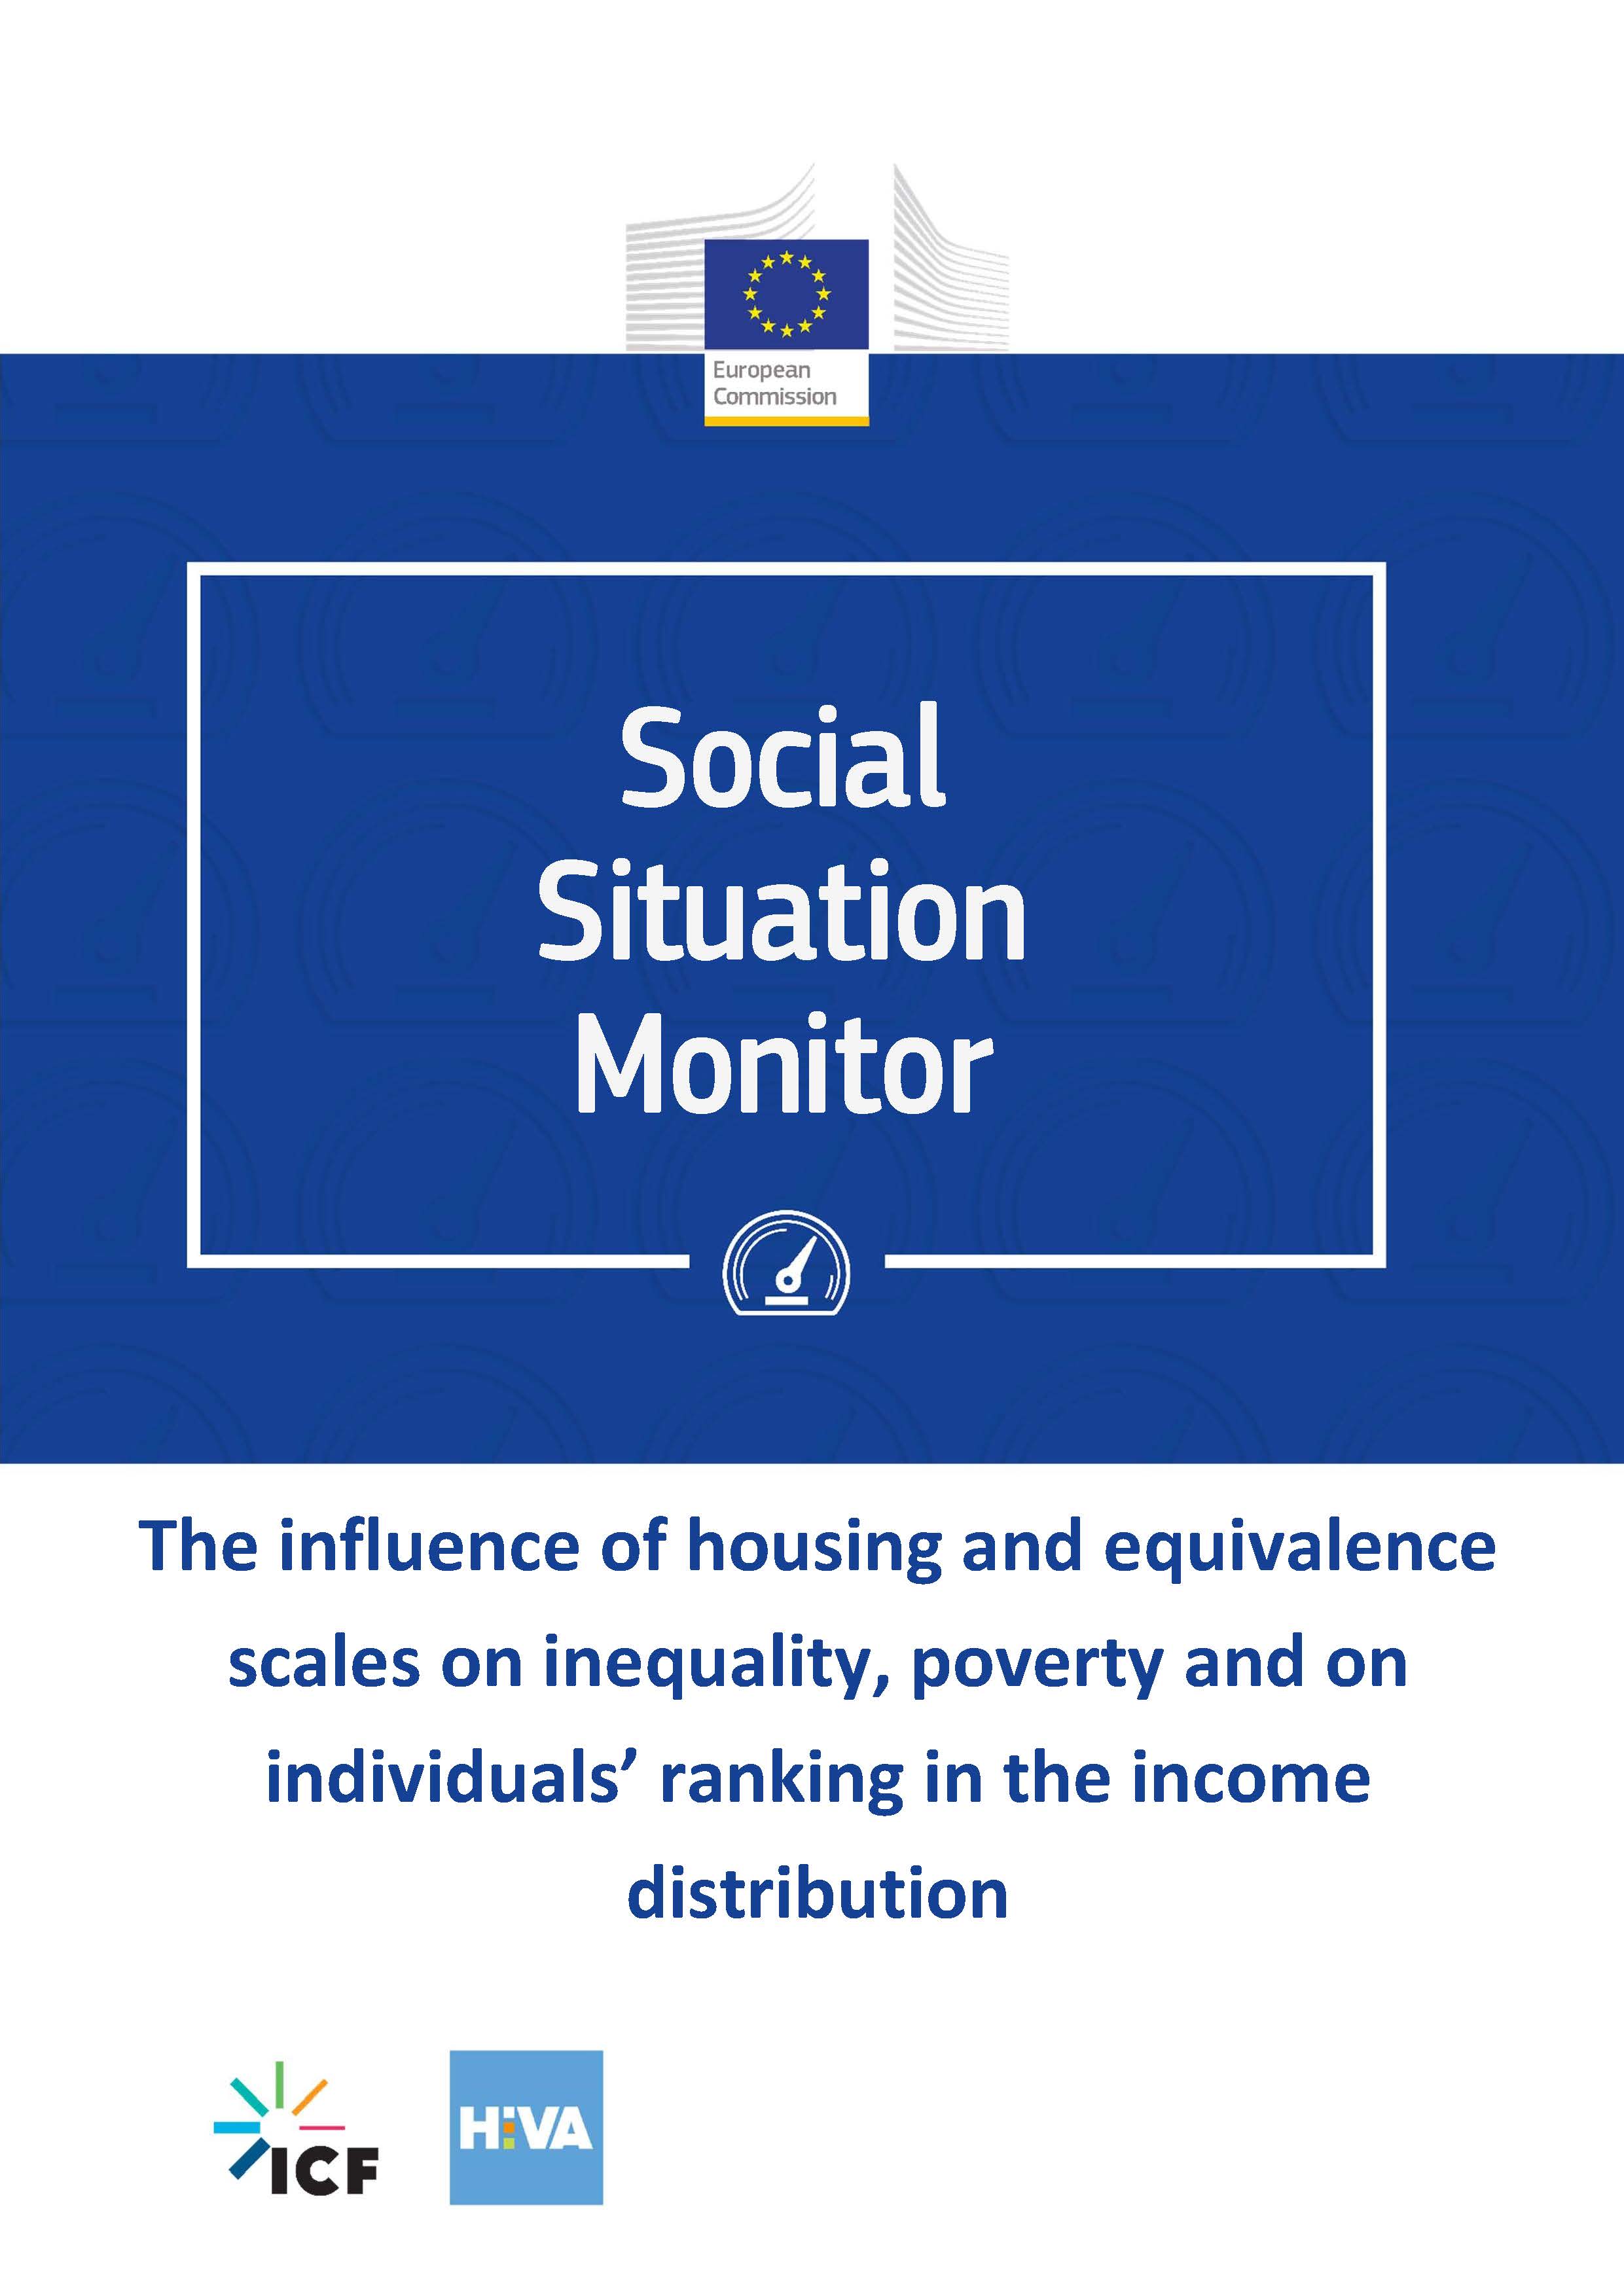 The influence of housing and equivalence scales on inequality, poverty and on individuals’ ranking in the income distribution